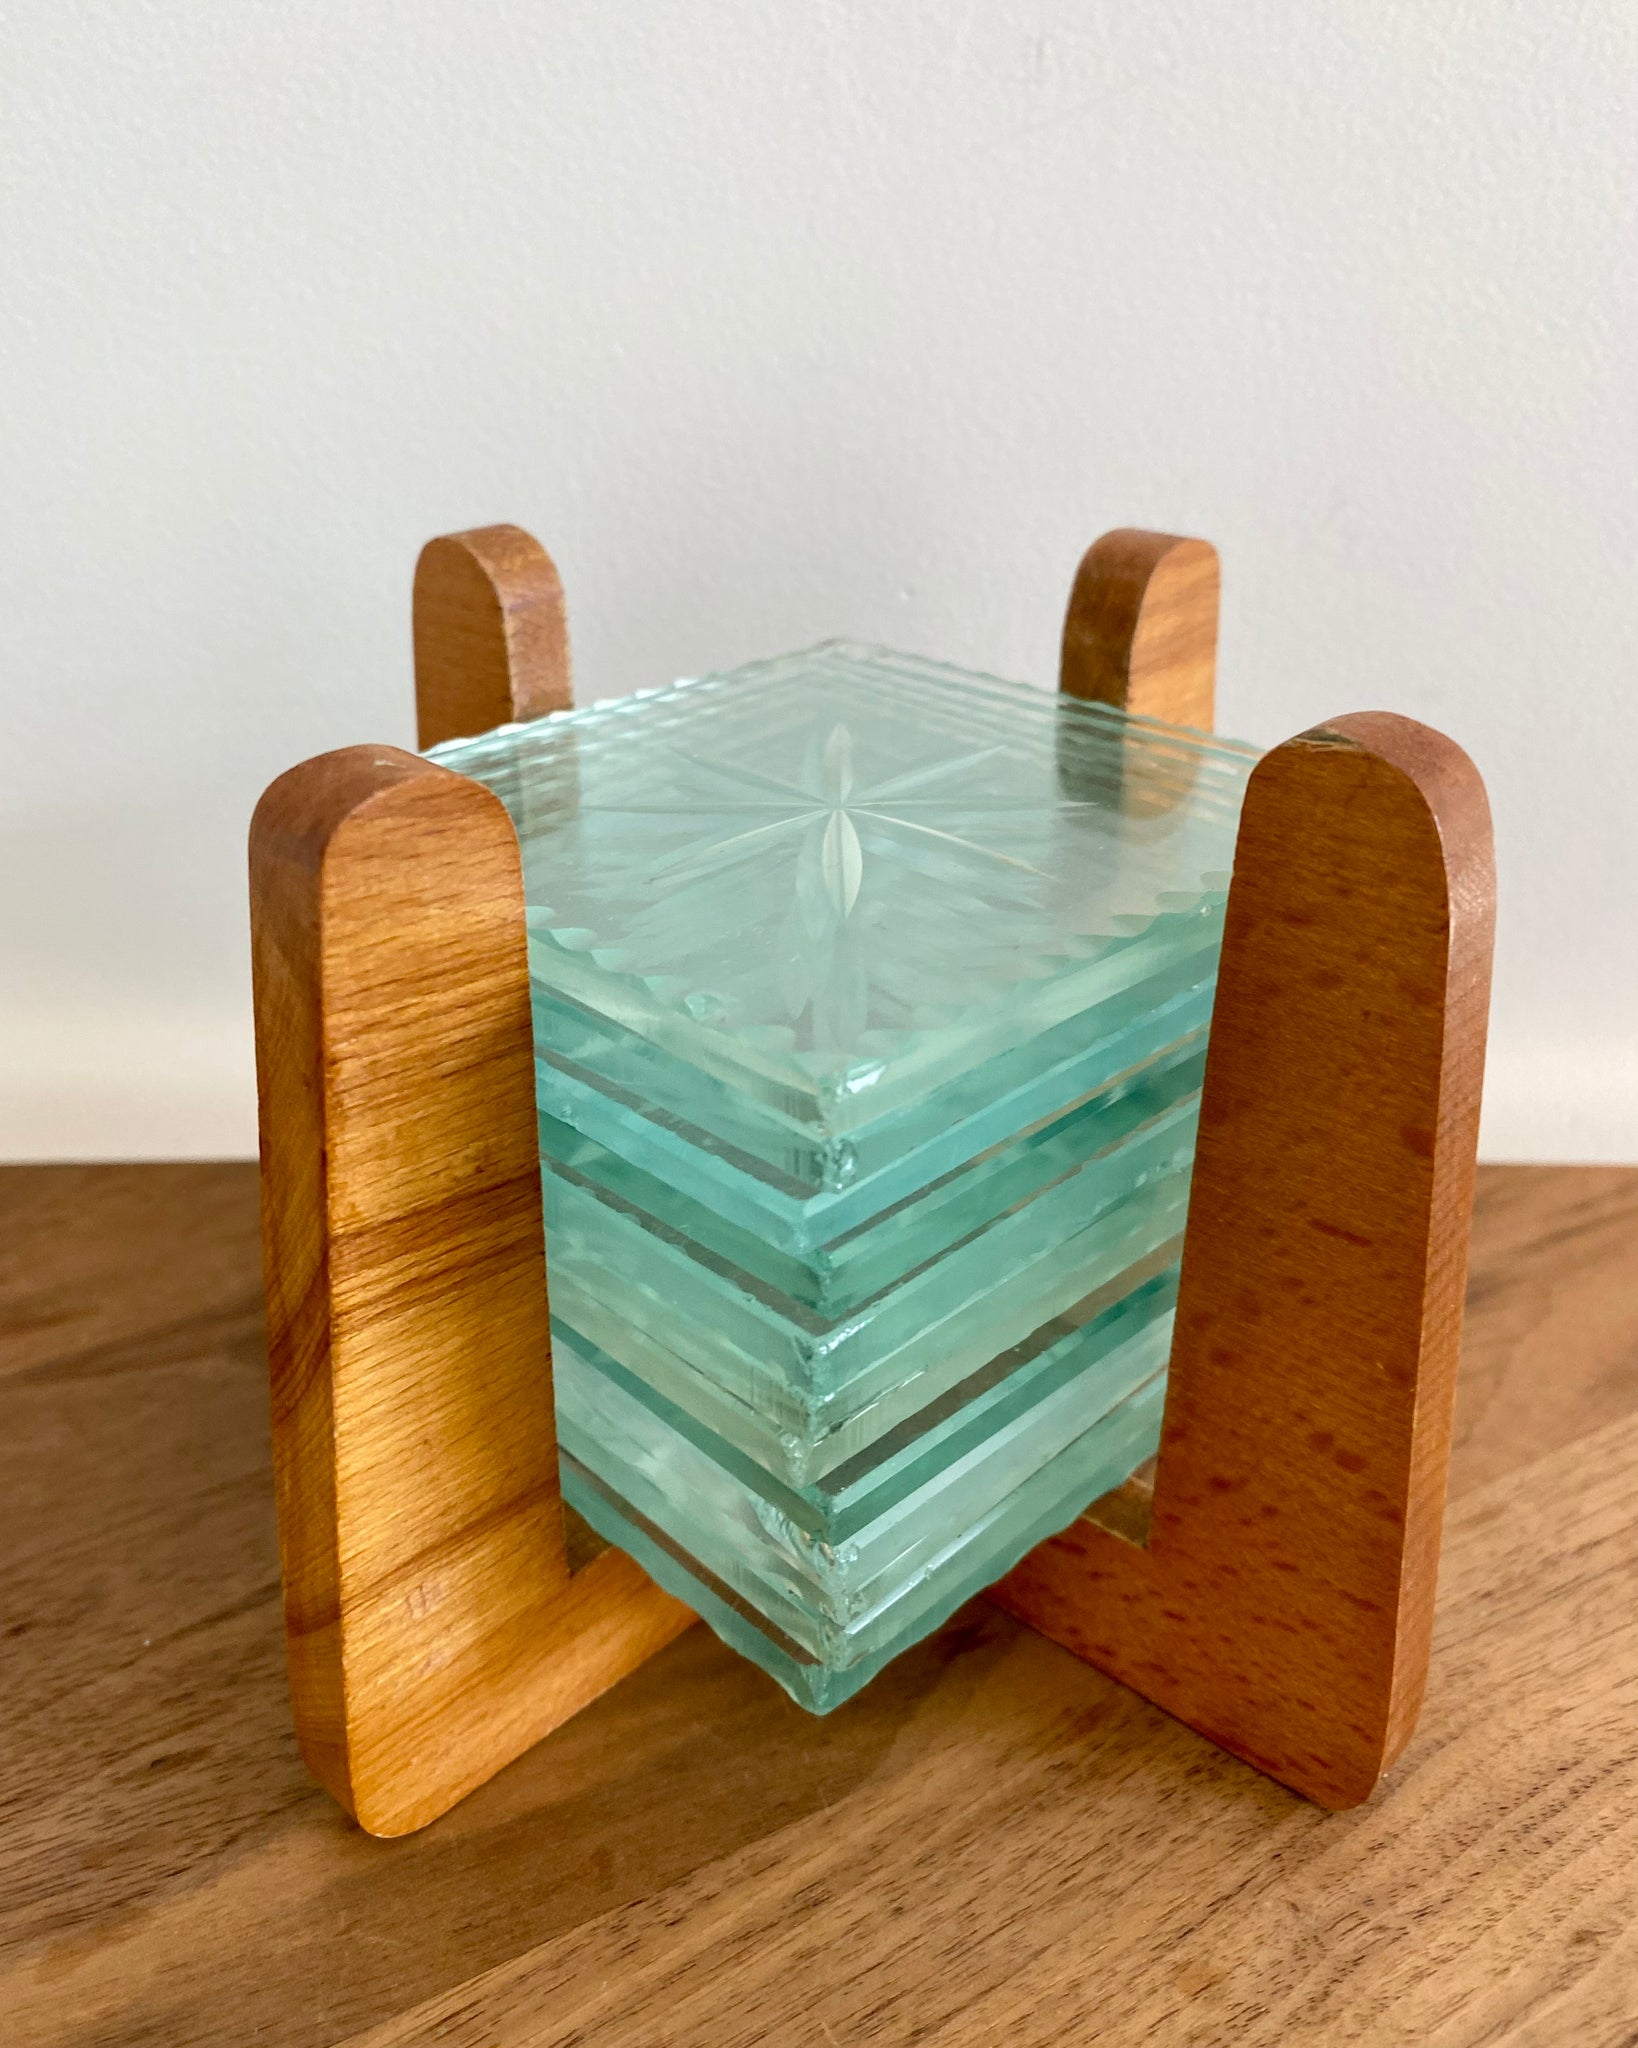 Set of 12 glass coasters with wooden holder